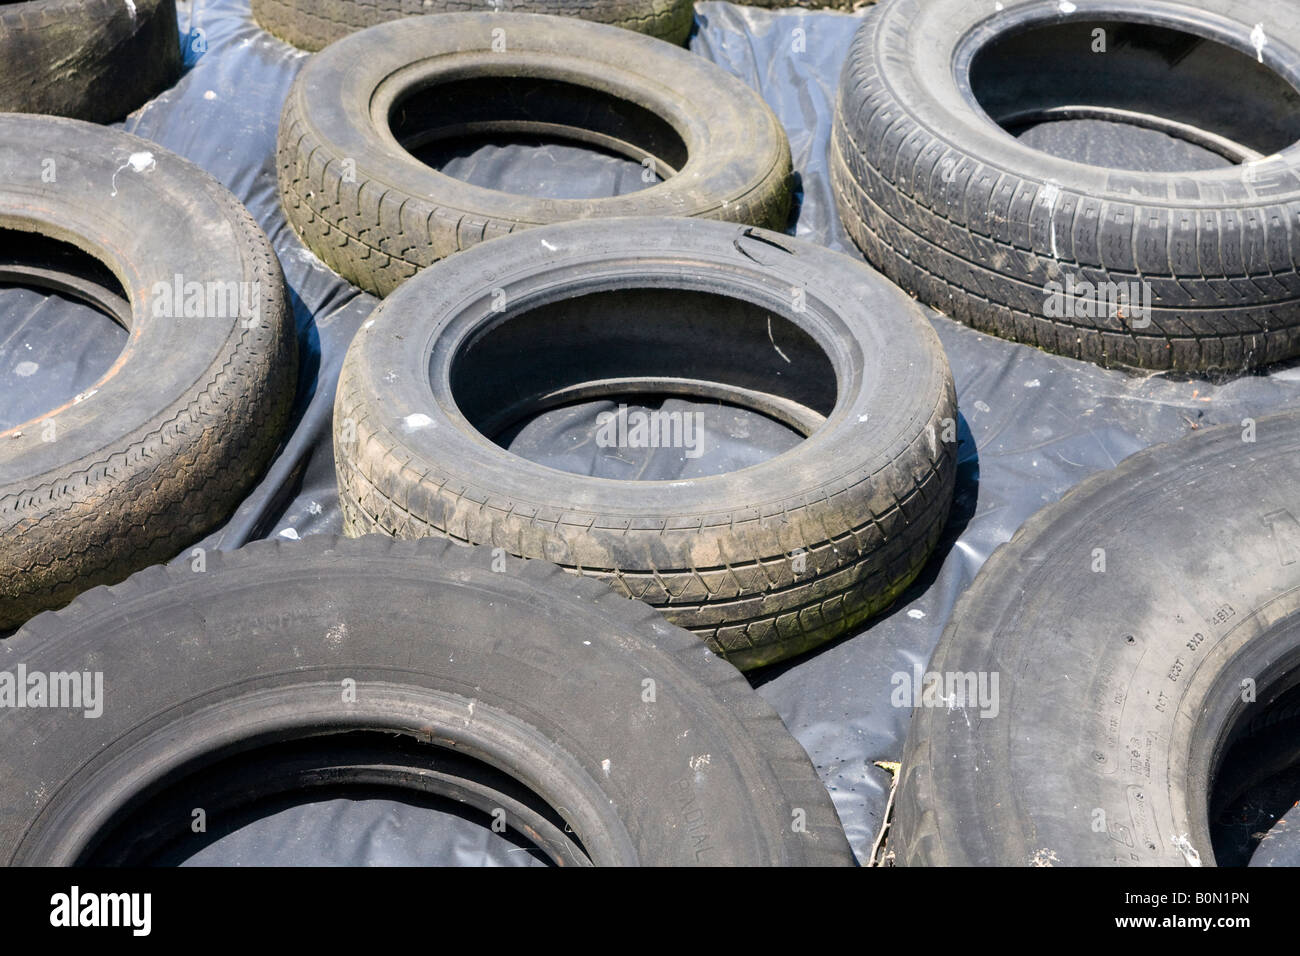 Used tyres holding down a polythene sheet on a silage pit Stock Photo